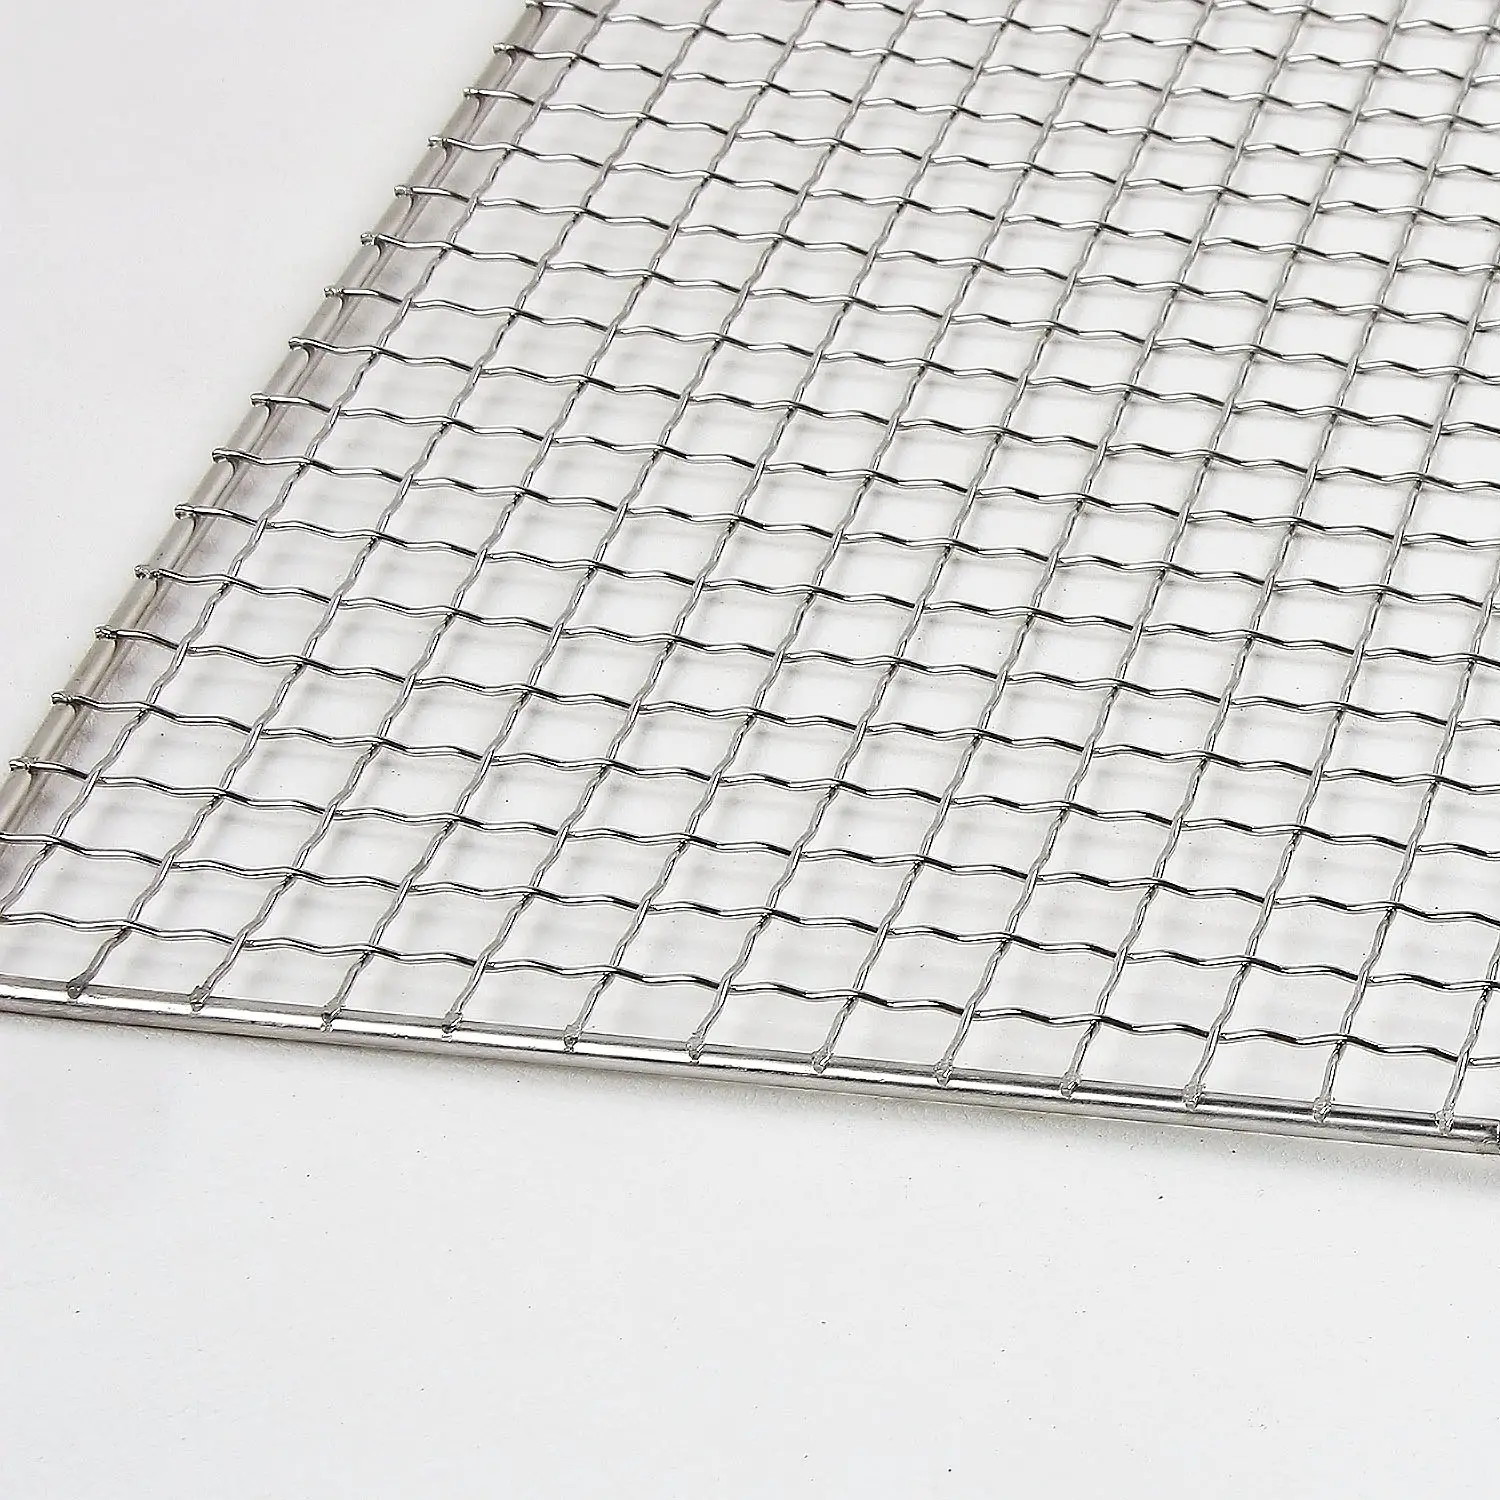 60x90cm Disposable grill rack Stainless Steel BBQ Grilling Wire Mesh Net Multifunction One time Use Wire Mesh Grill